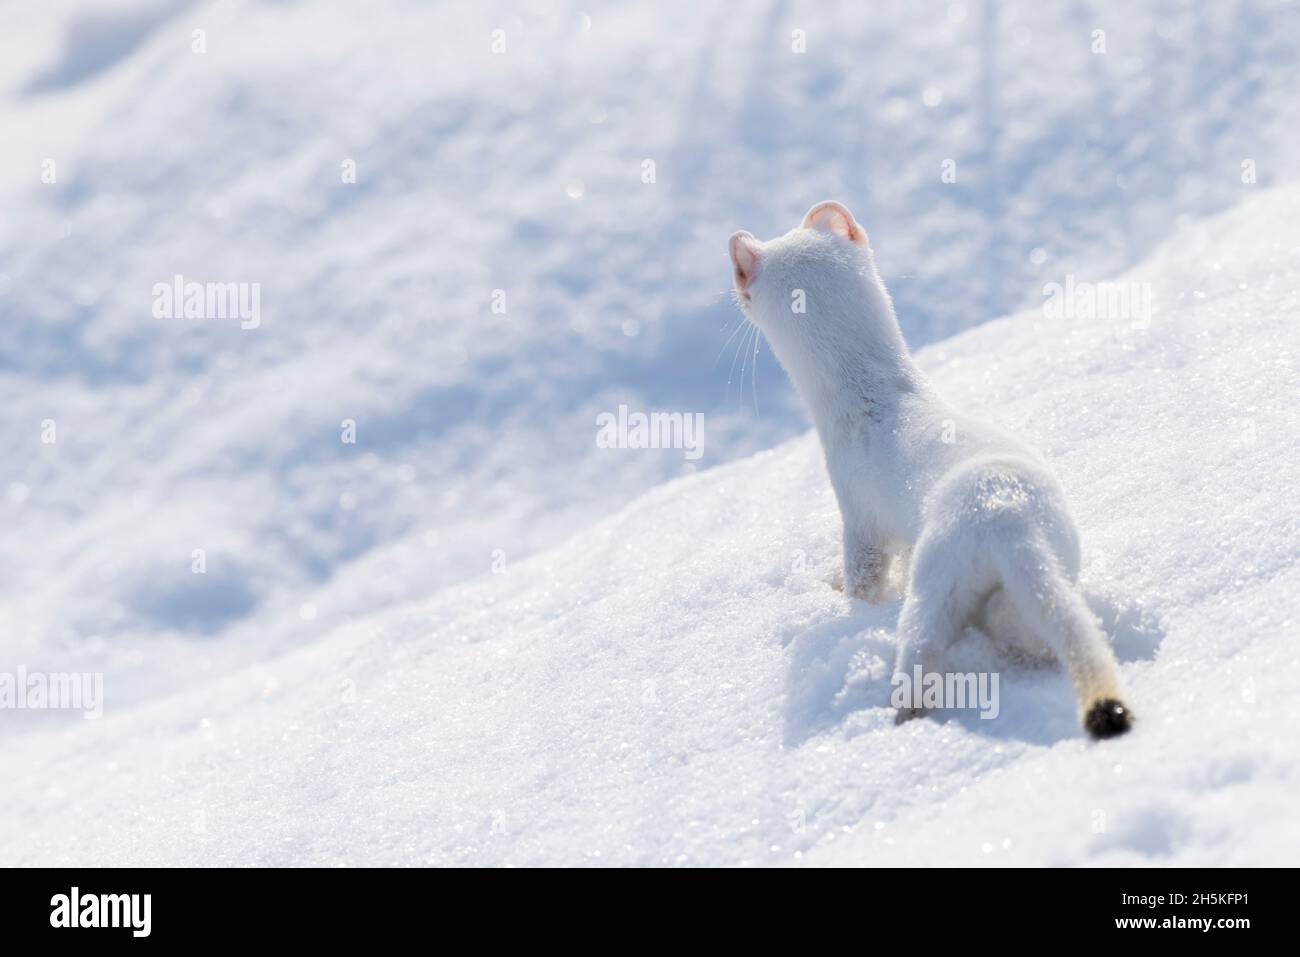 View taken from behind of a short-tailed weasel (Mustela erminea) camouflaged in its white winter coat, looking out over the snow covered landscape Stock Photo